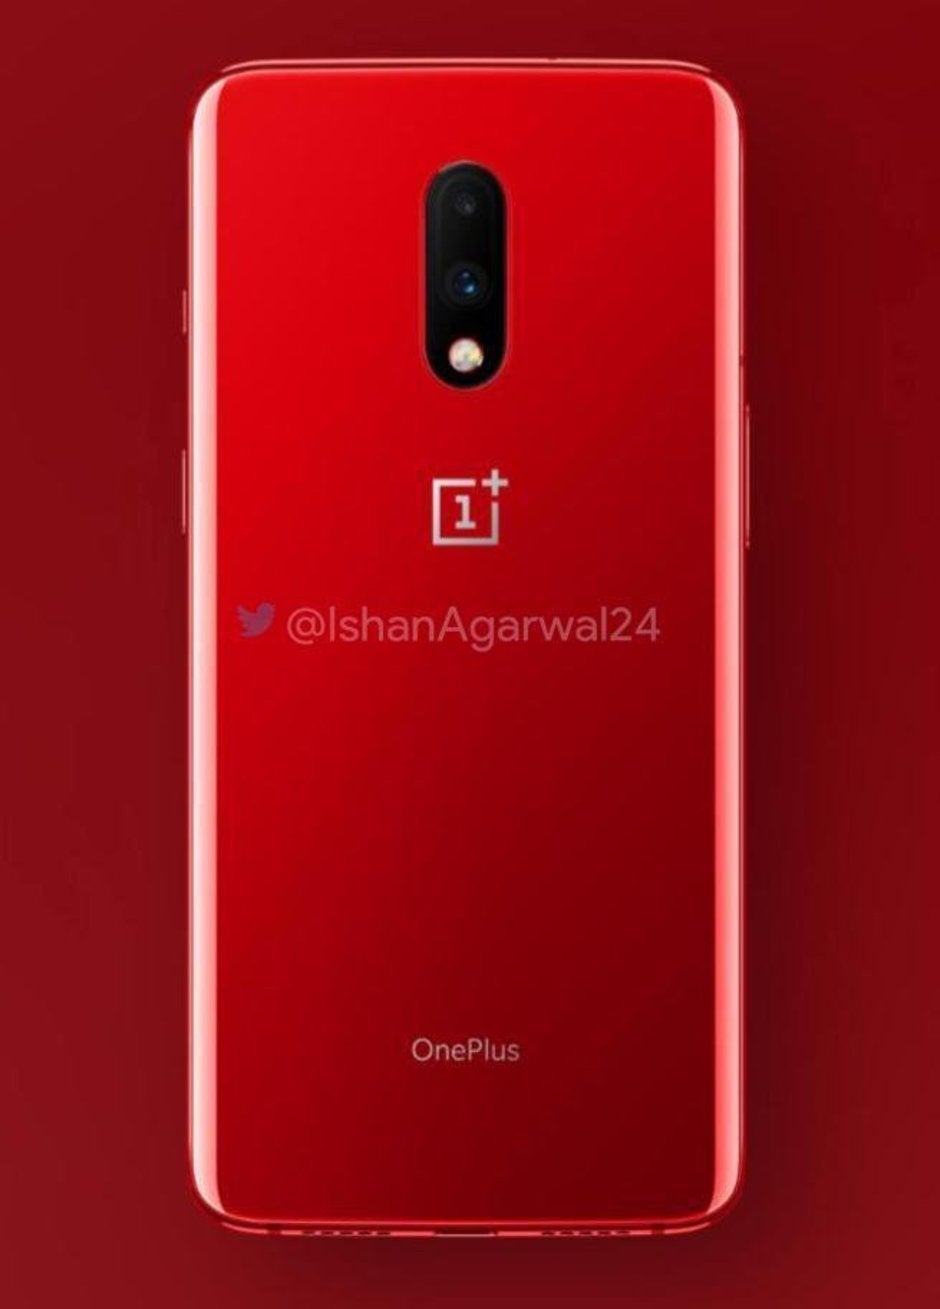 Leaked OnePlus 7 renders reveal stunning red color